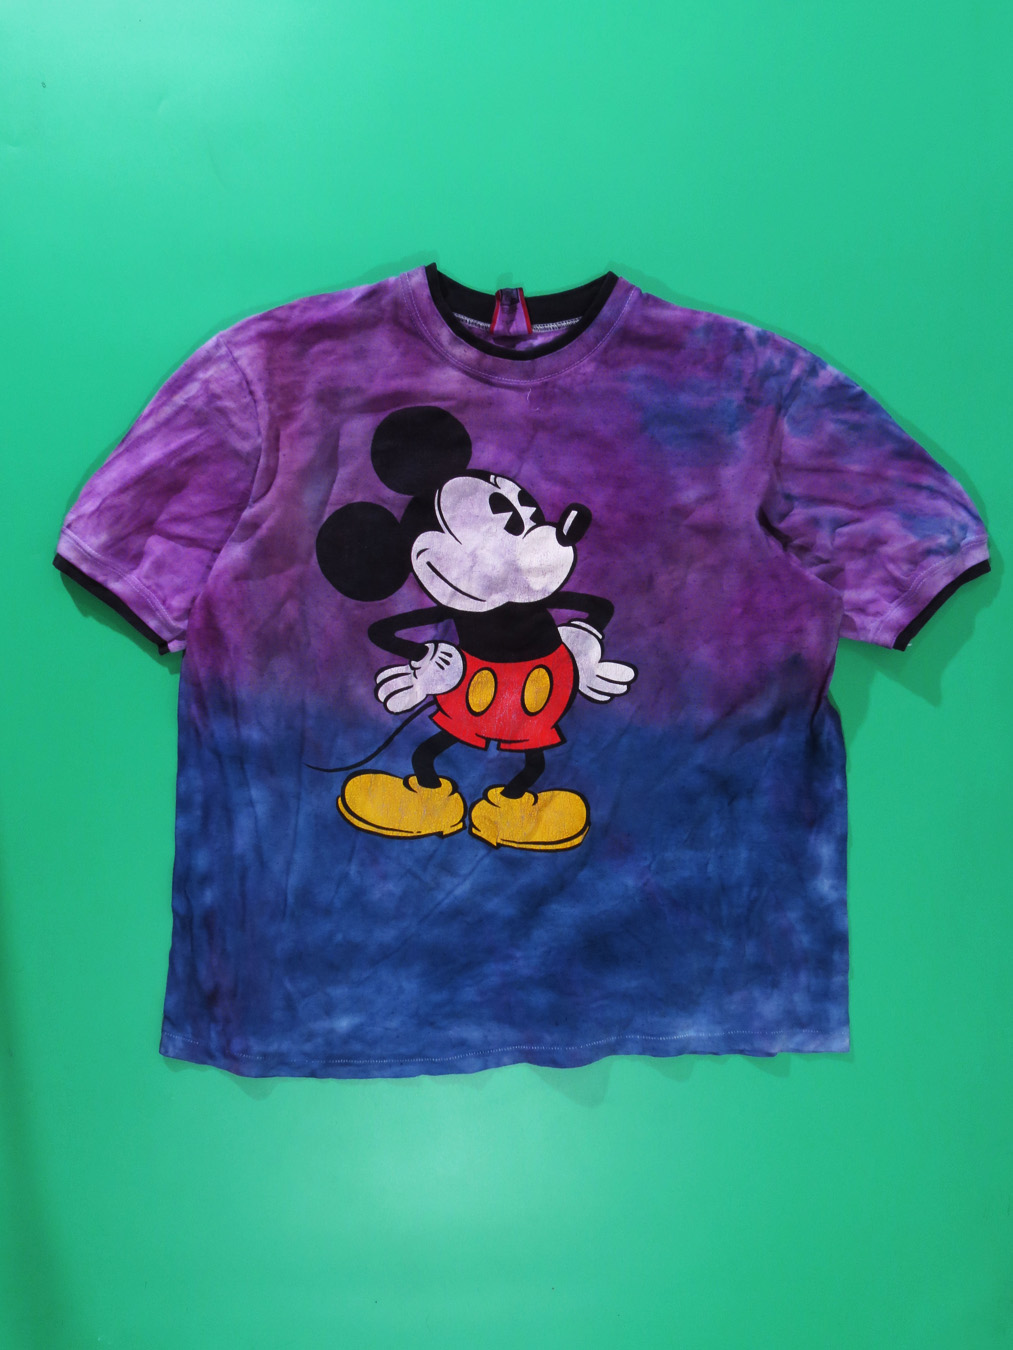 90s Tie Dye Mickey Mouse T-Shirt - 5 Star Vintage